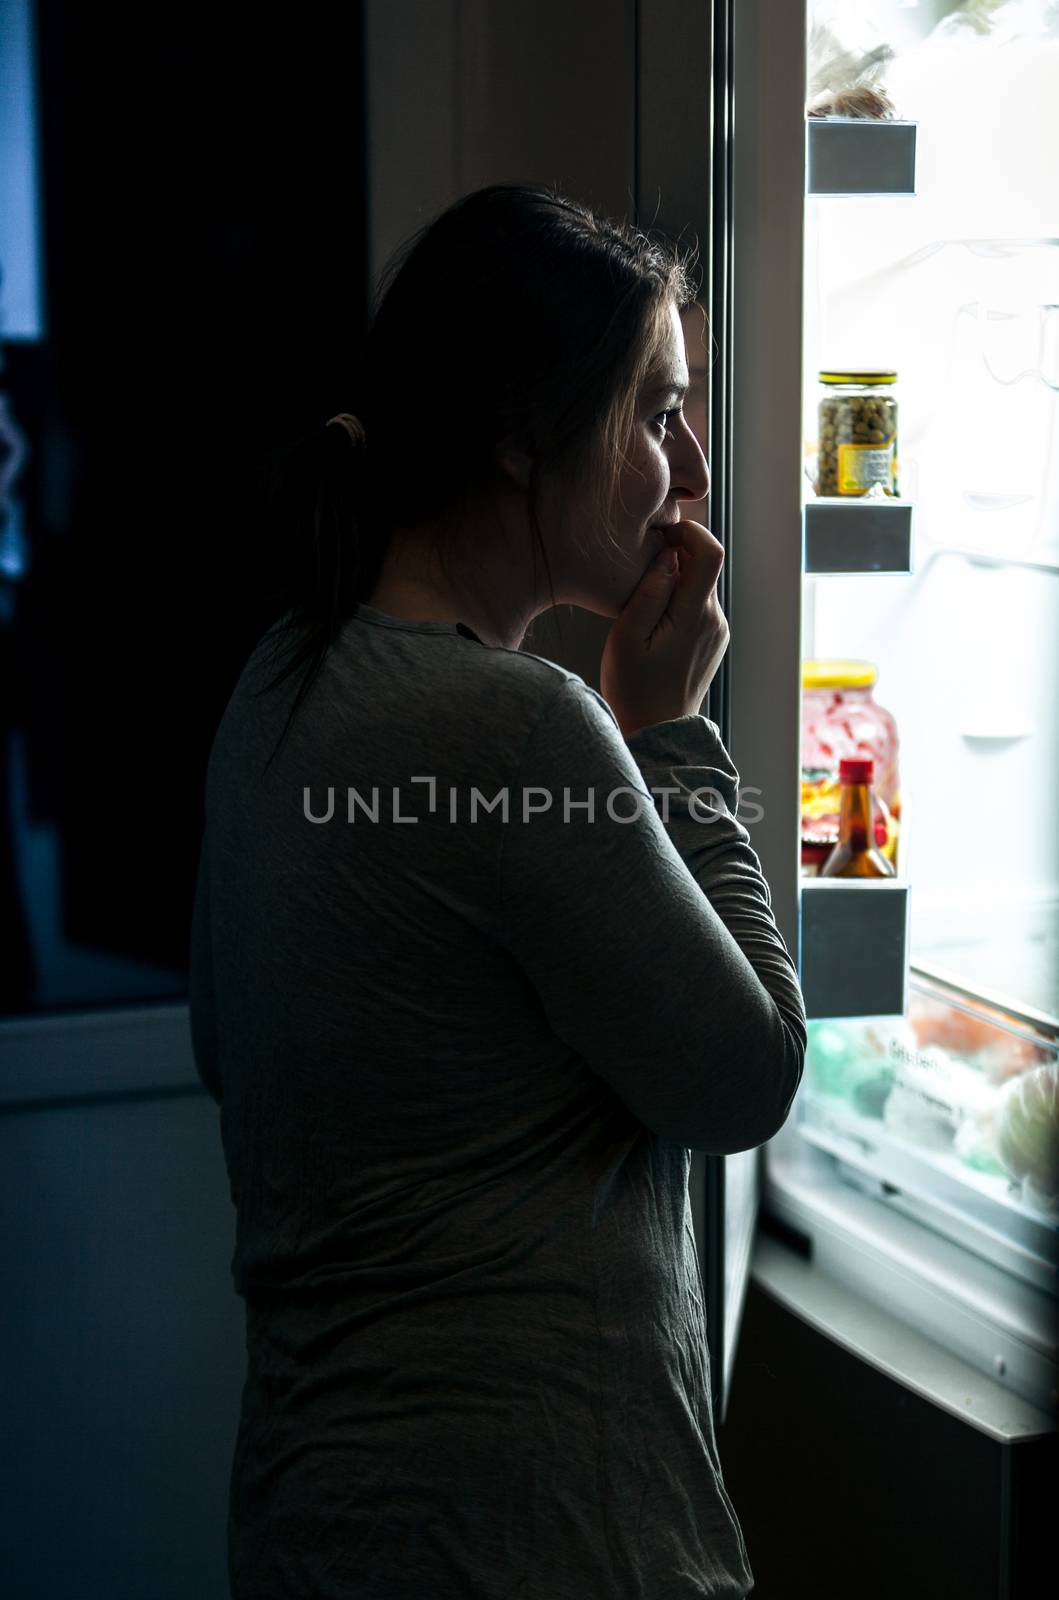 Portrait of woman in pajamas opening refrigerator at night